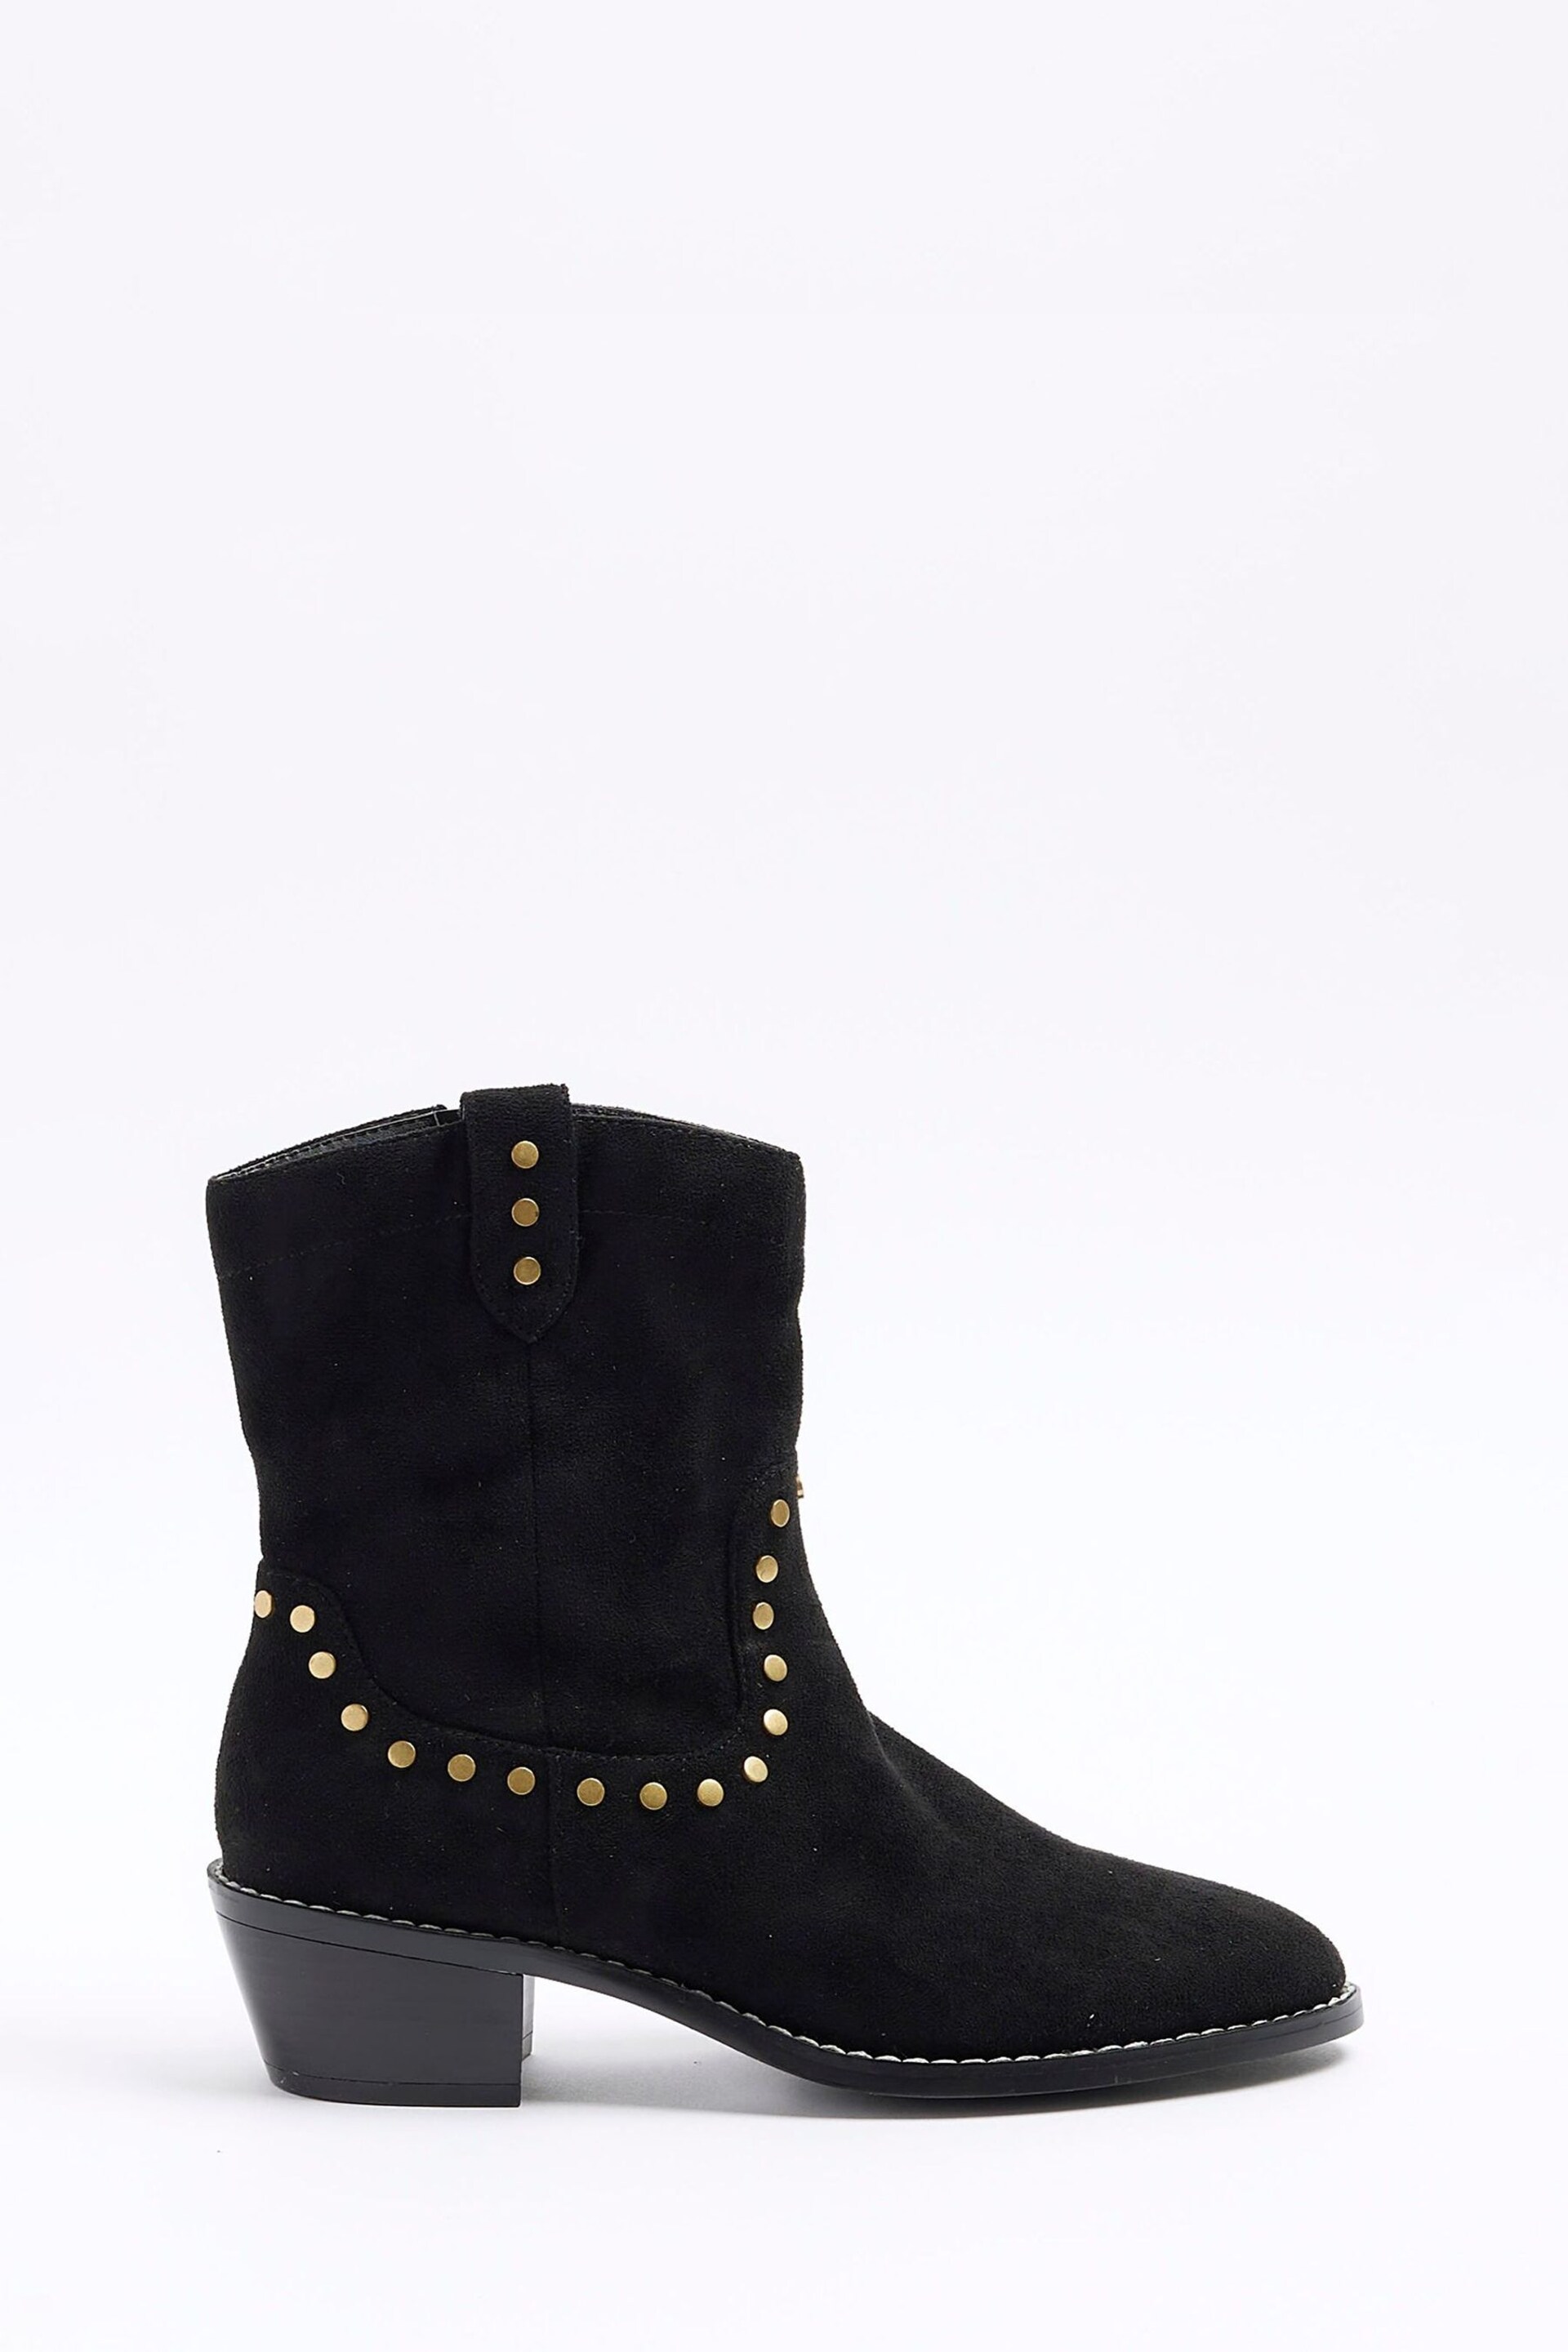 River Island Brown Studded Western Ankle Boots - Image 1 of 4